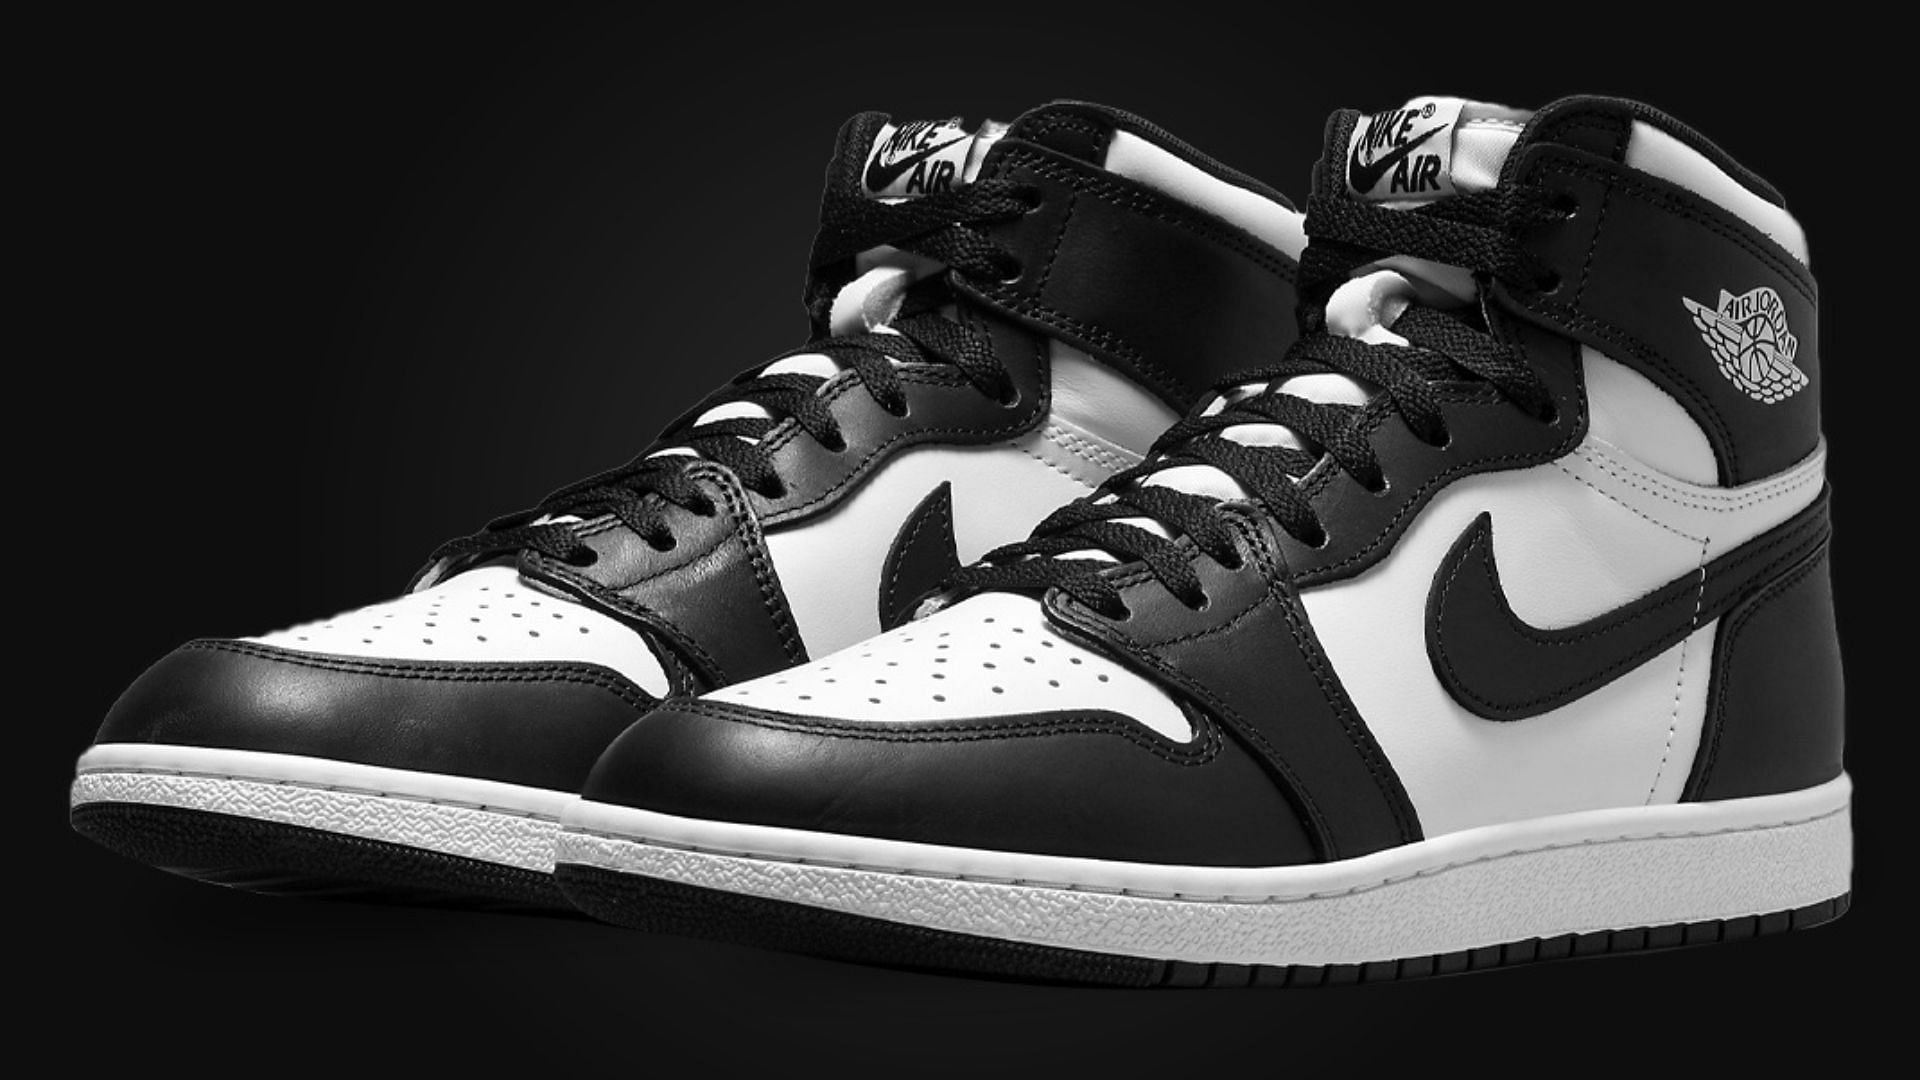 inflación bolígrafo realce Where to buy Air Jordan 1 High 85 “Panda” shoes? Price and more details  explored